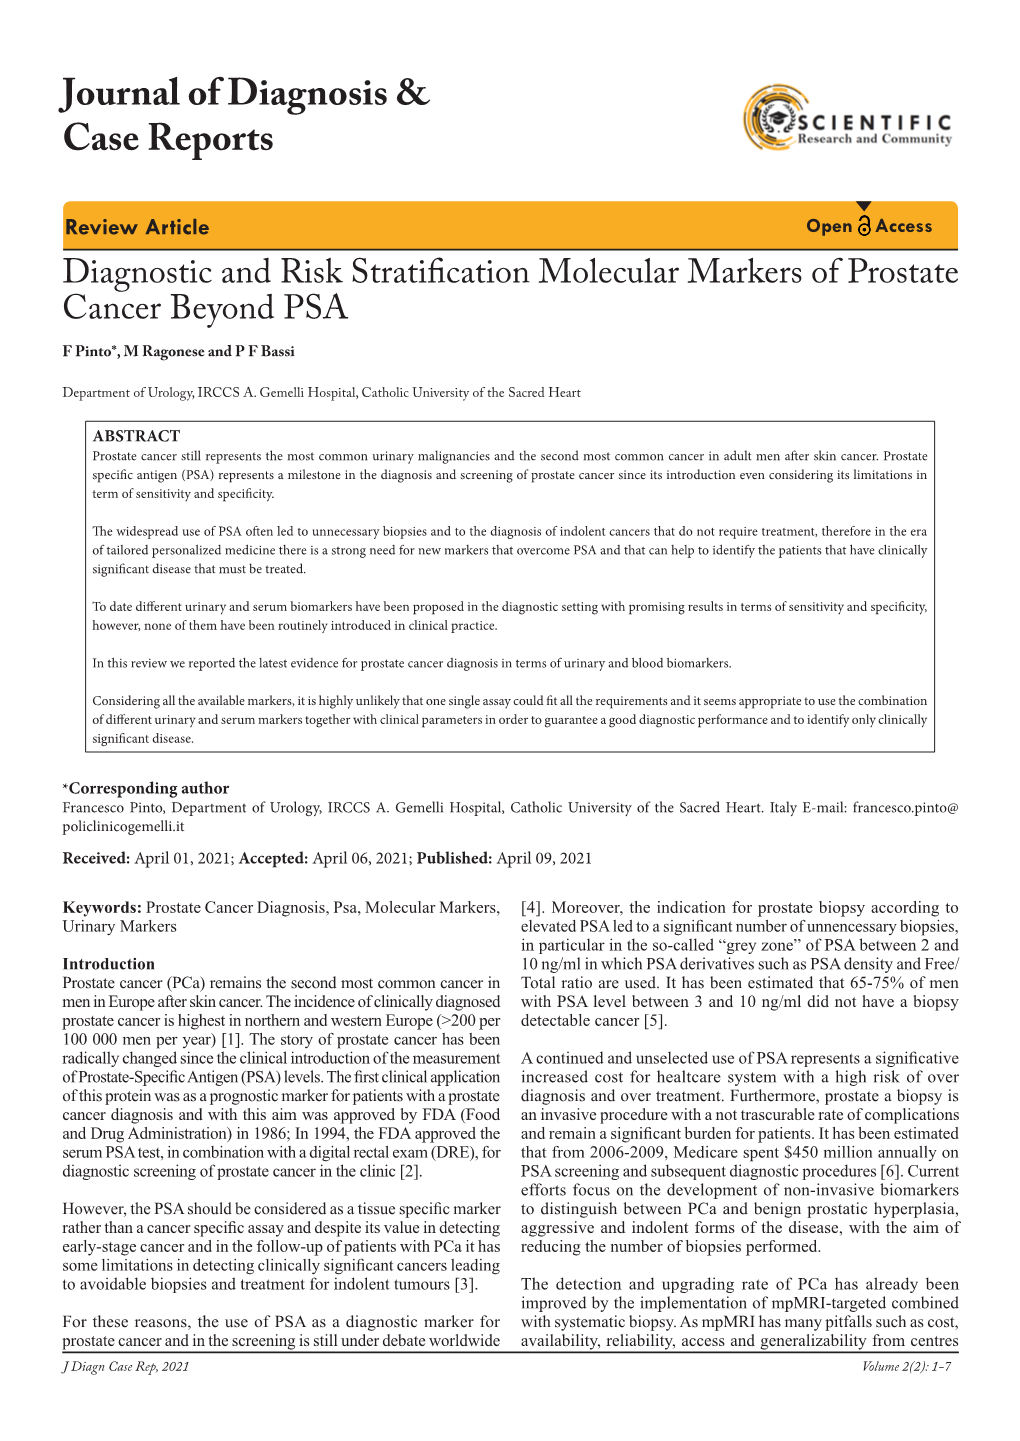 View Article Open Access Diagnostic and Risk Stratification Molecular Markers of Prostate Cancer Beyond PSA F Pinto*, M Ragonese and P F Bassi